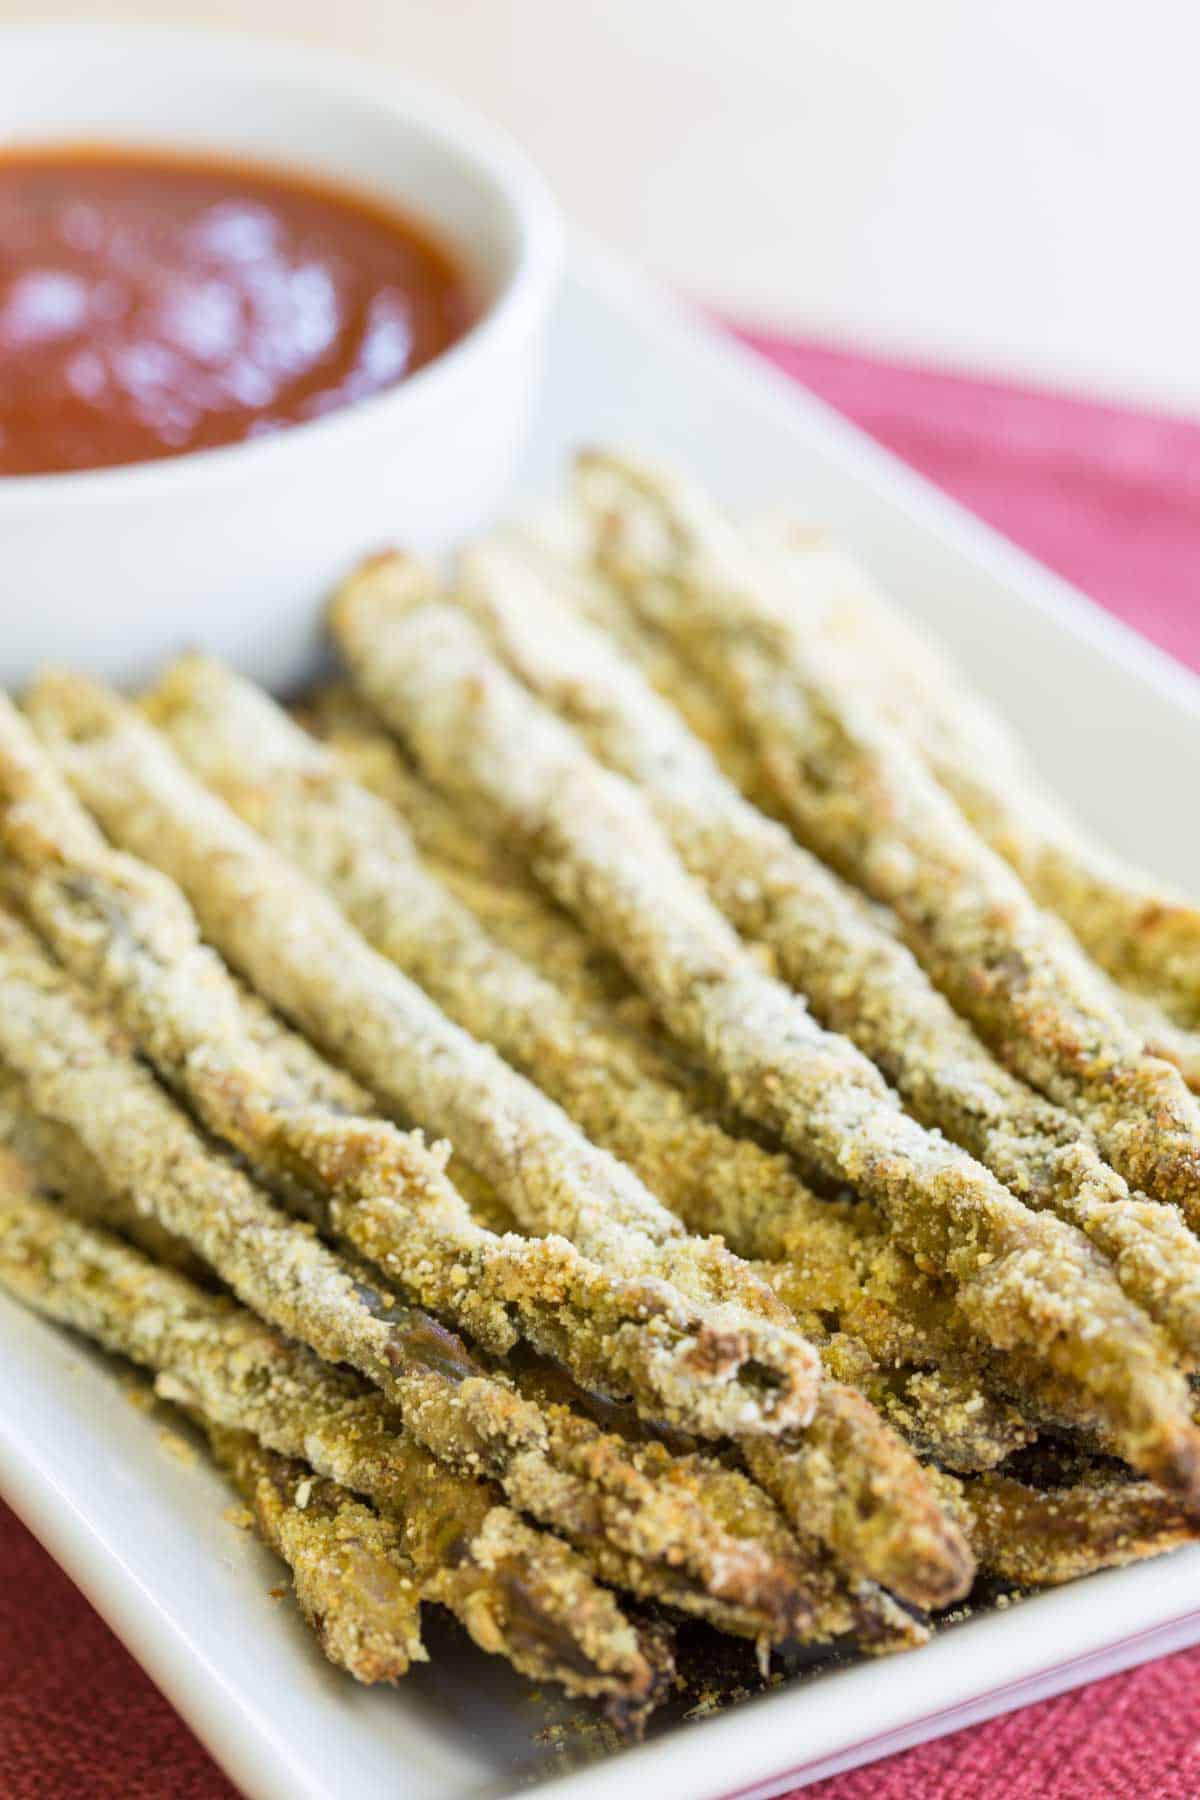 Asparagus spears with a cornmeal breading on a rectangular plate with a bowl of tomato sauce for dipping.